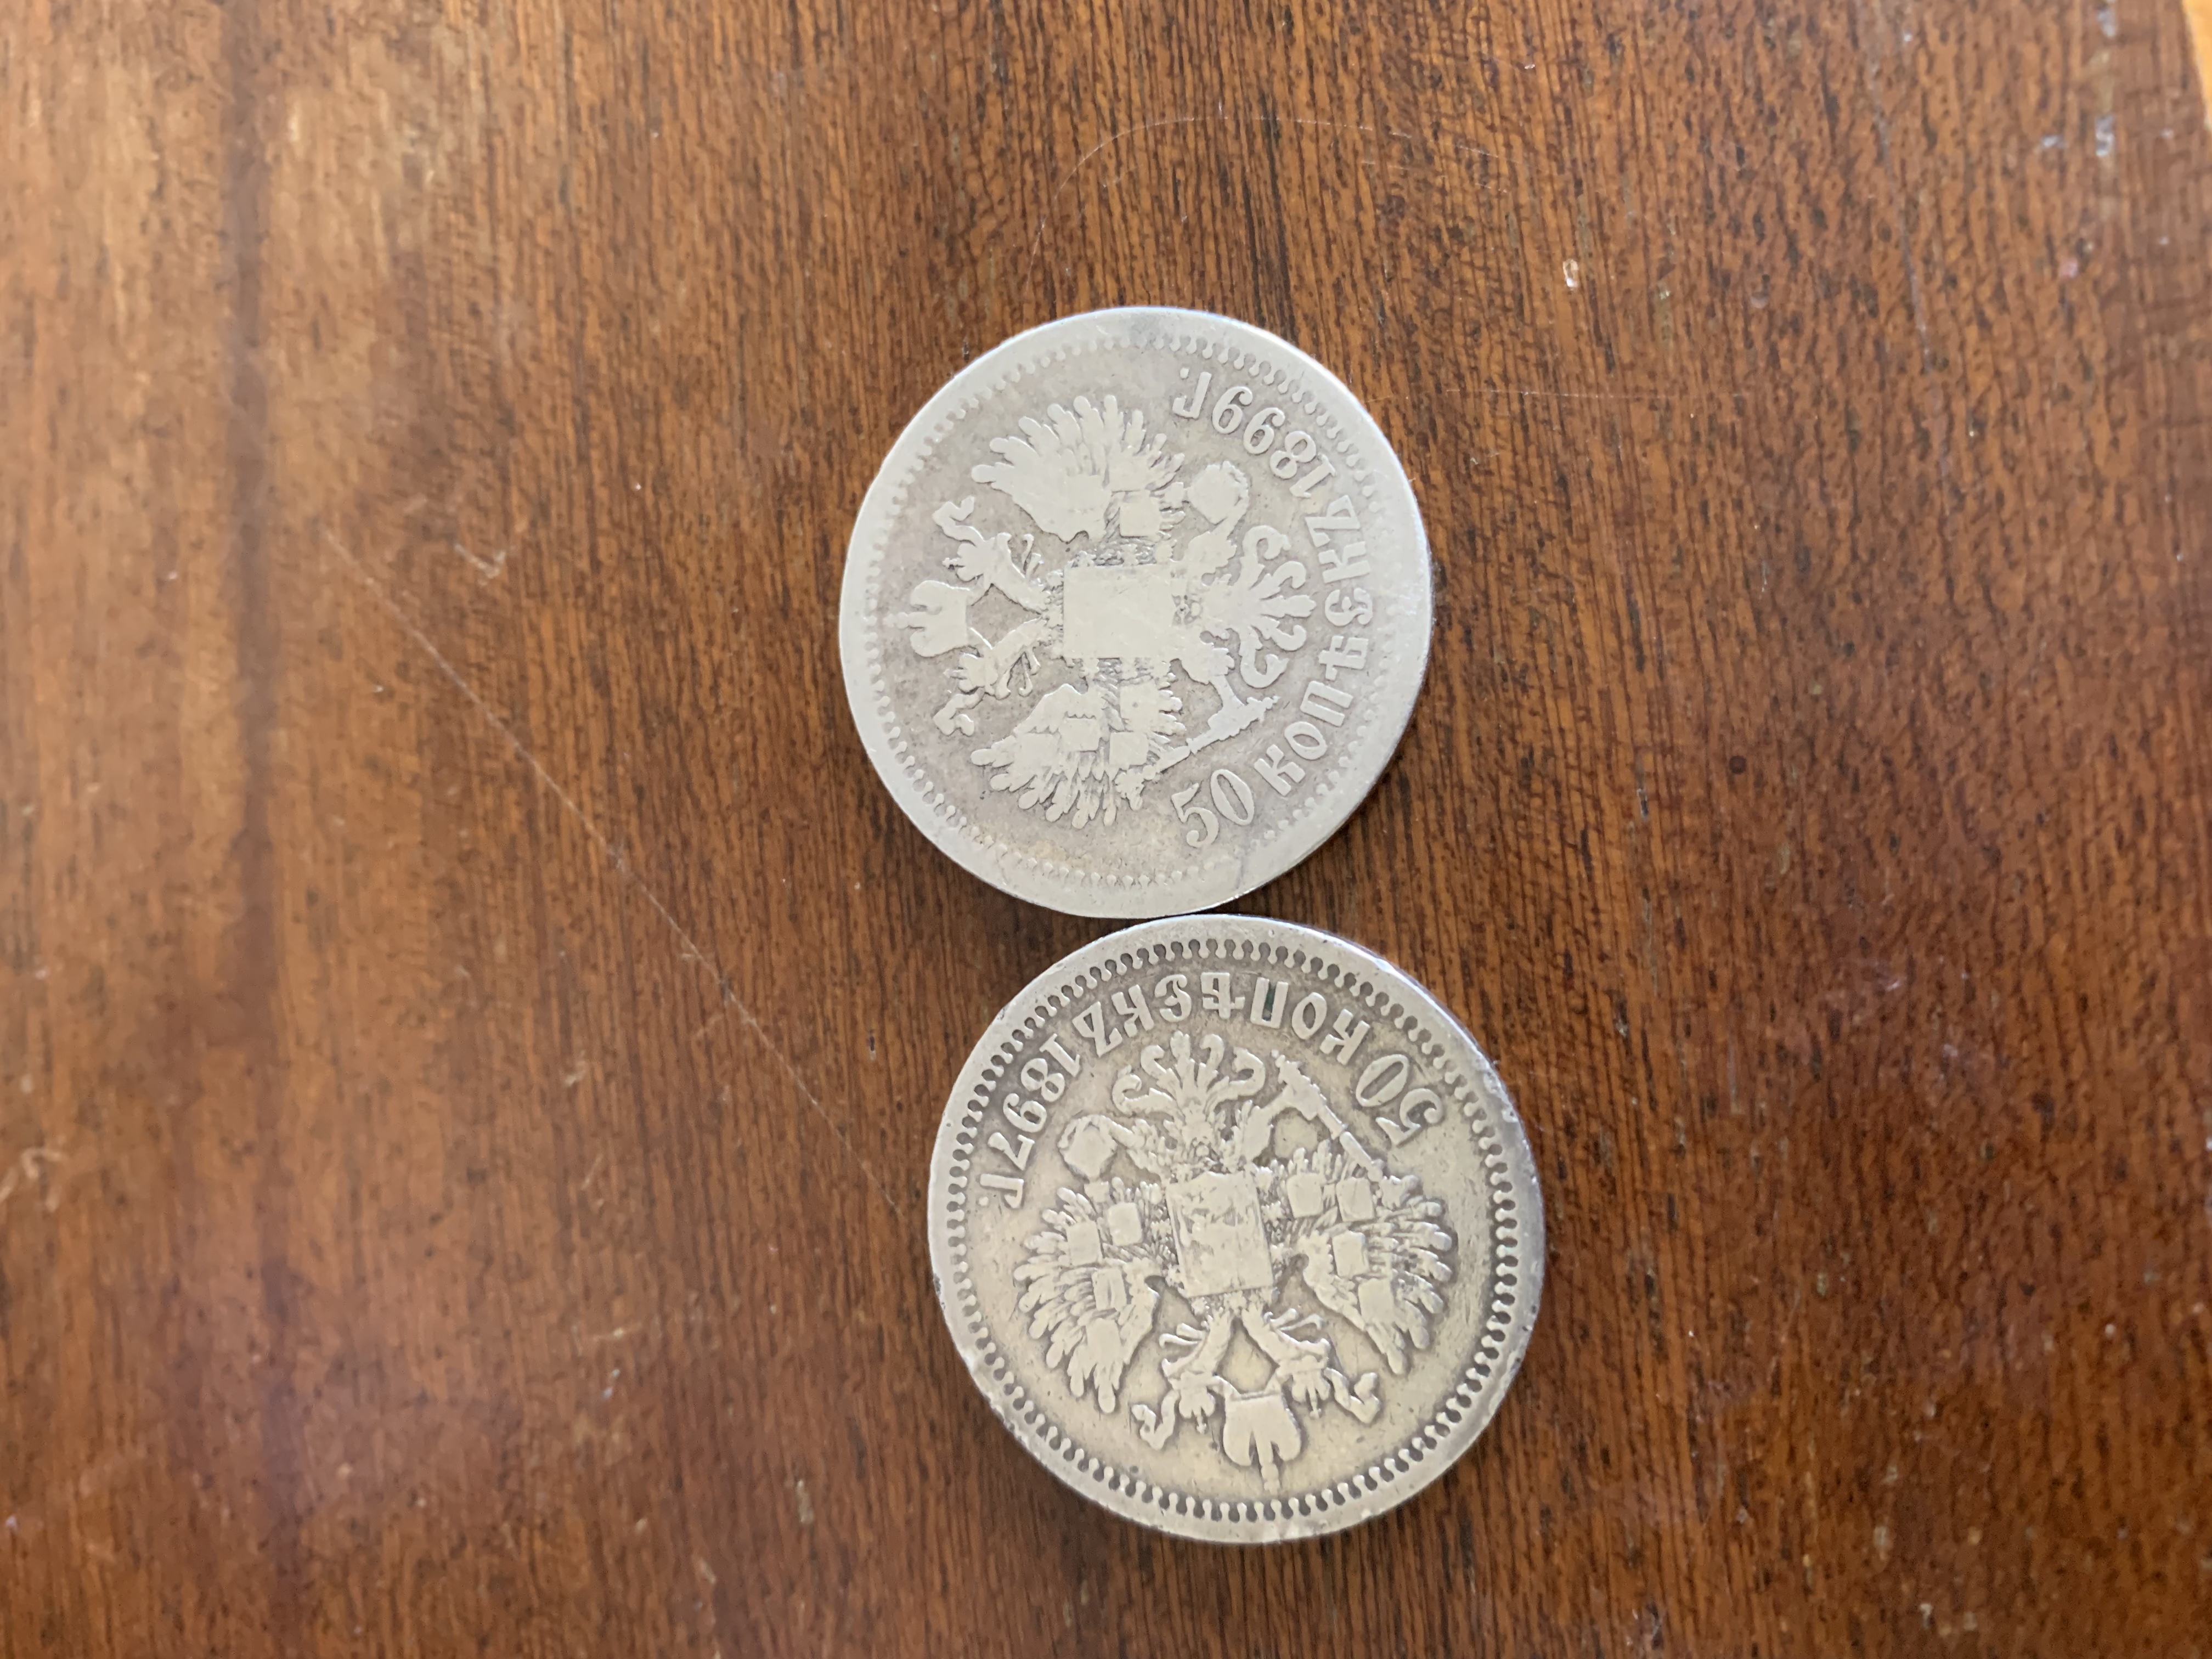 Two Imperial Russian Silver Kopeck Coins 1897 & 1899 - Image 2 of 2